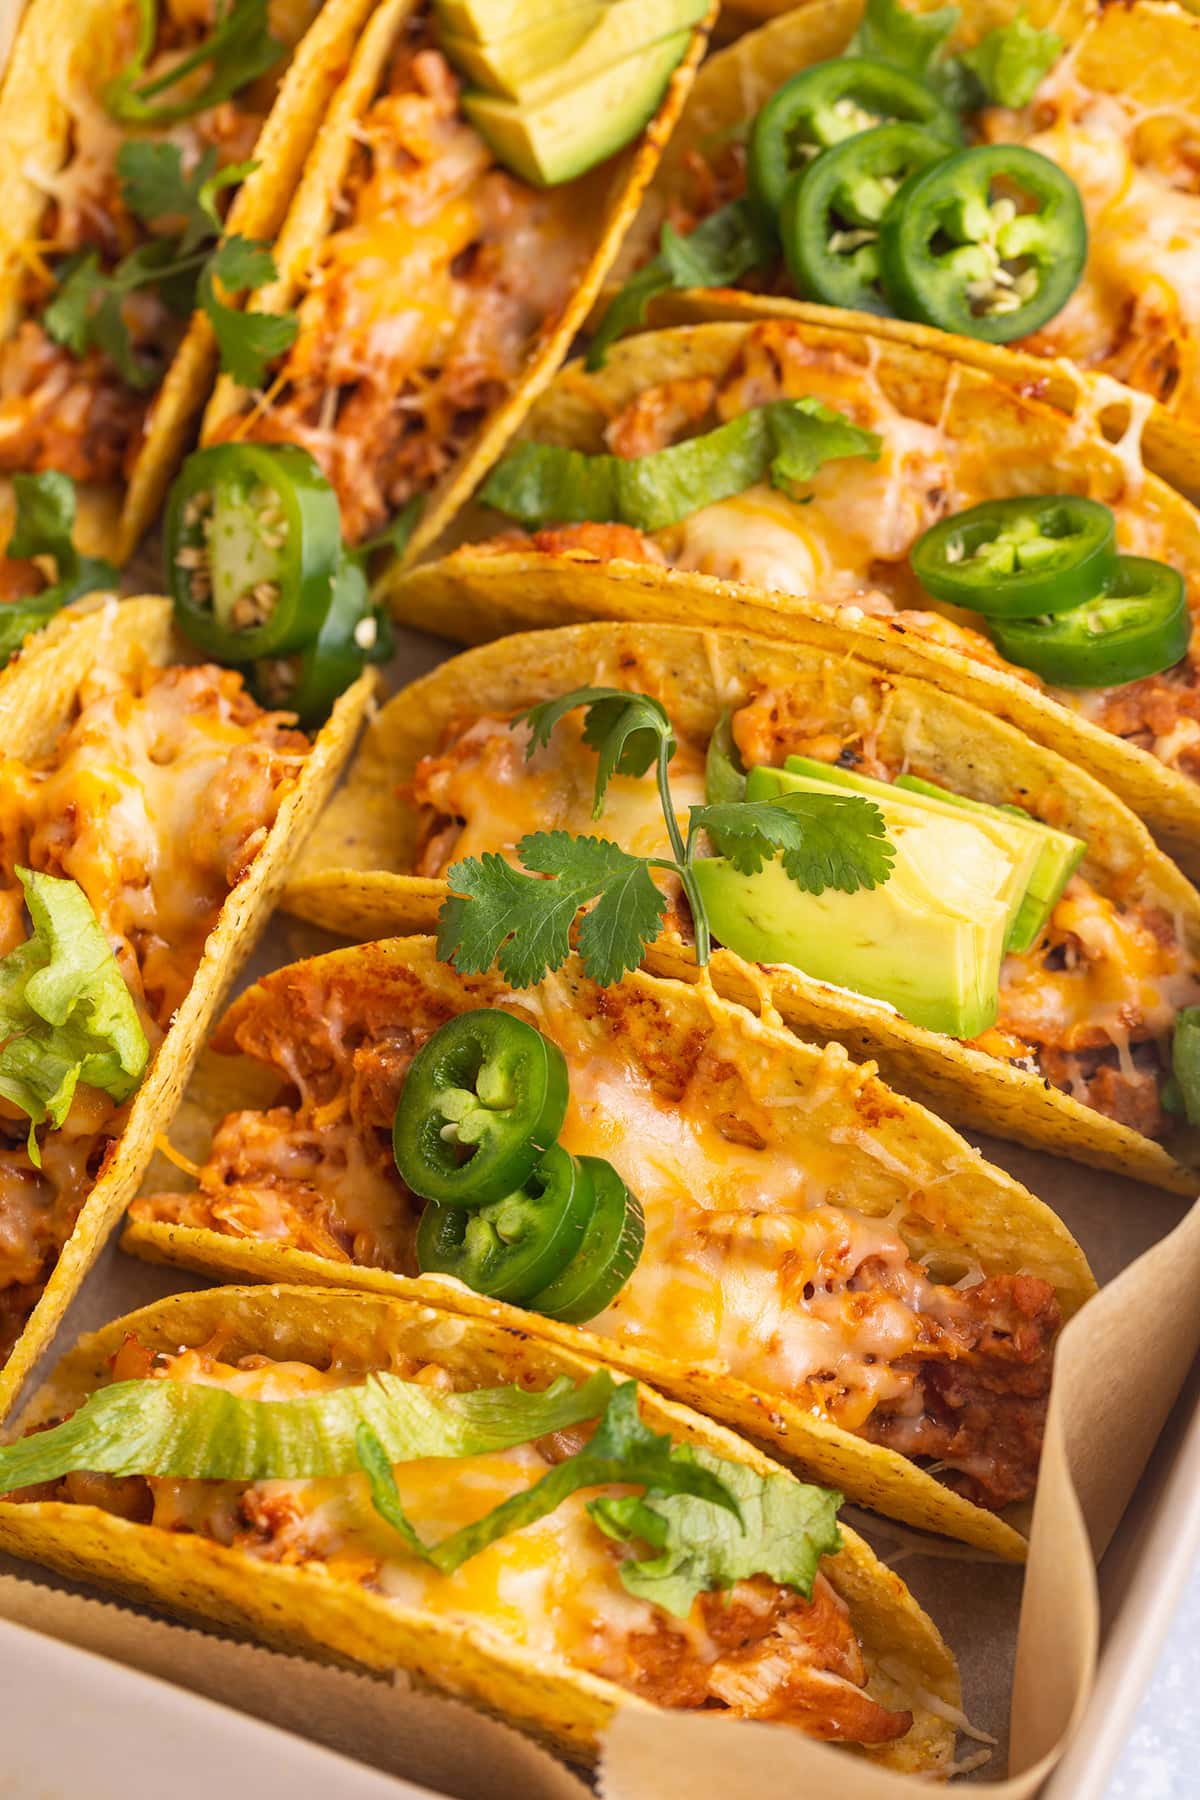 Overhead, close-up view of several baked chicken tacos in crunchy shells with avocados and jalapenos on top.